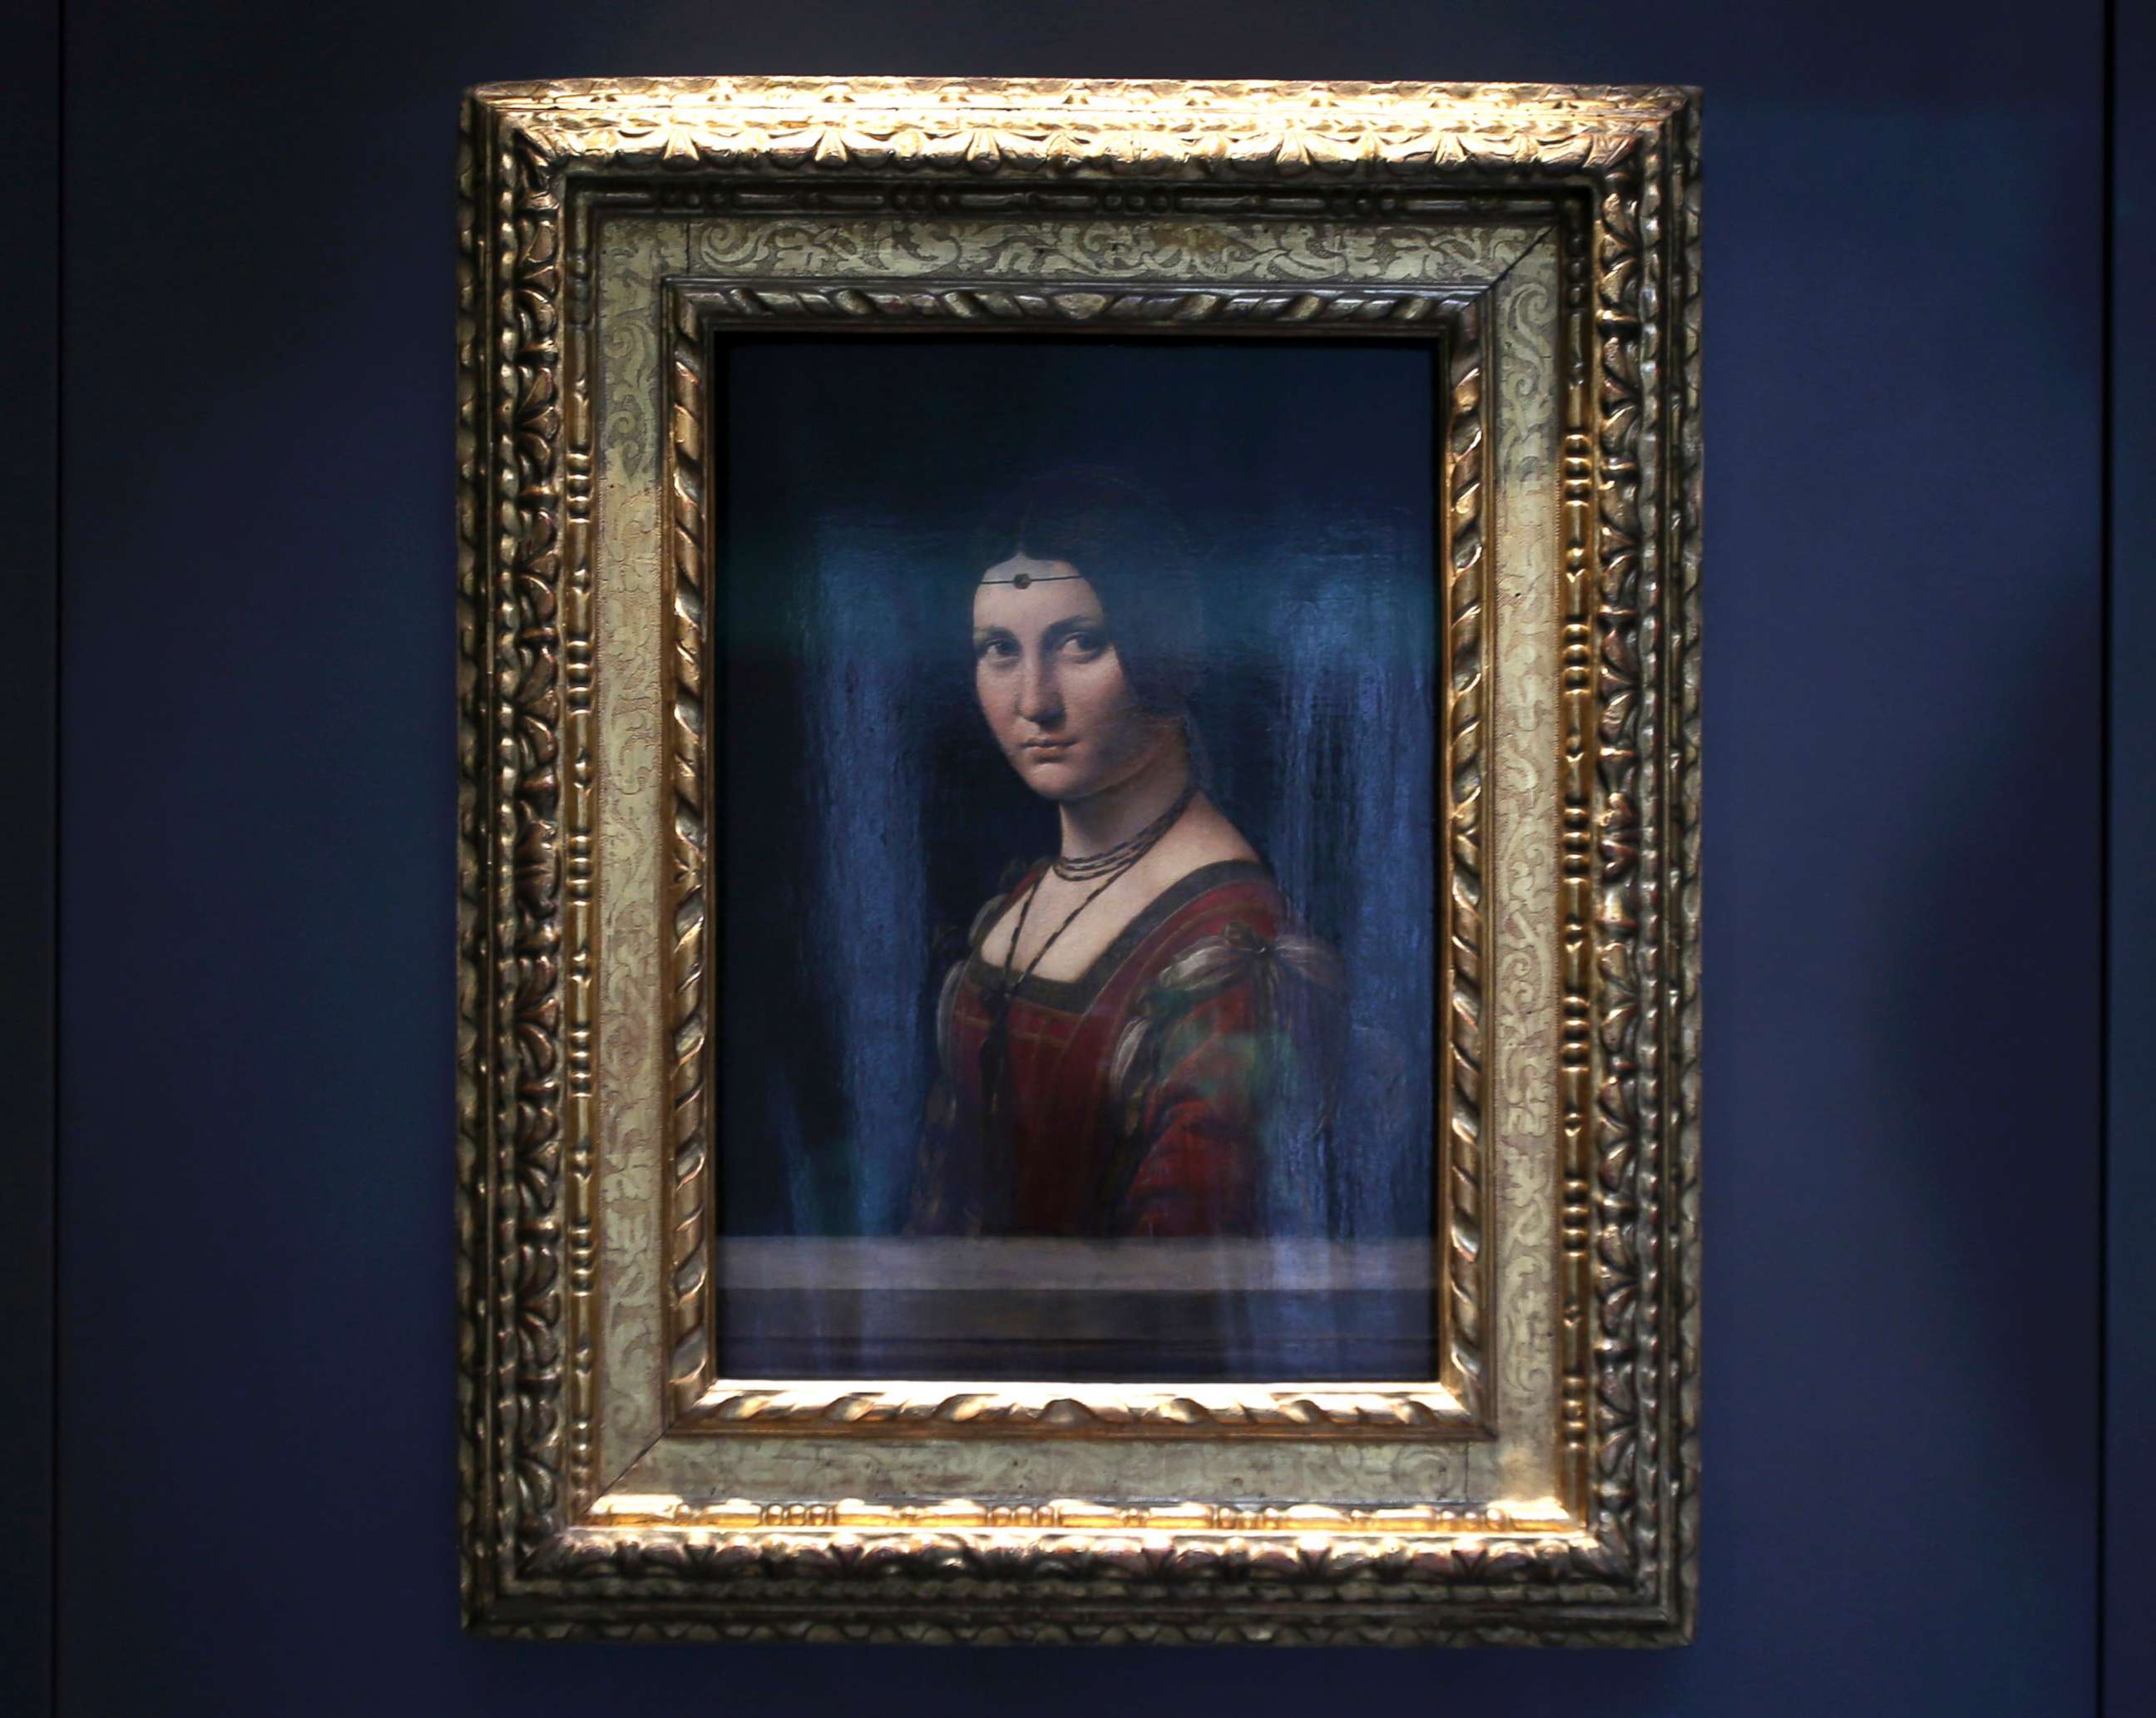 PHOTO: "Portrait of a Woman" by Leonardo da Vinci, is displayed at the Louvre Museum in Abu Dhabi.